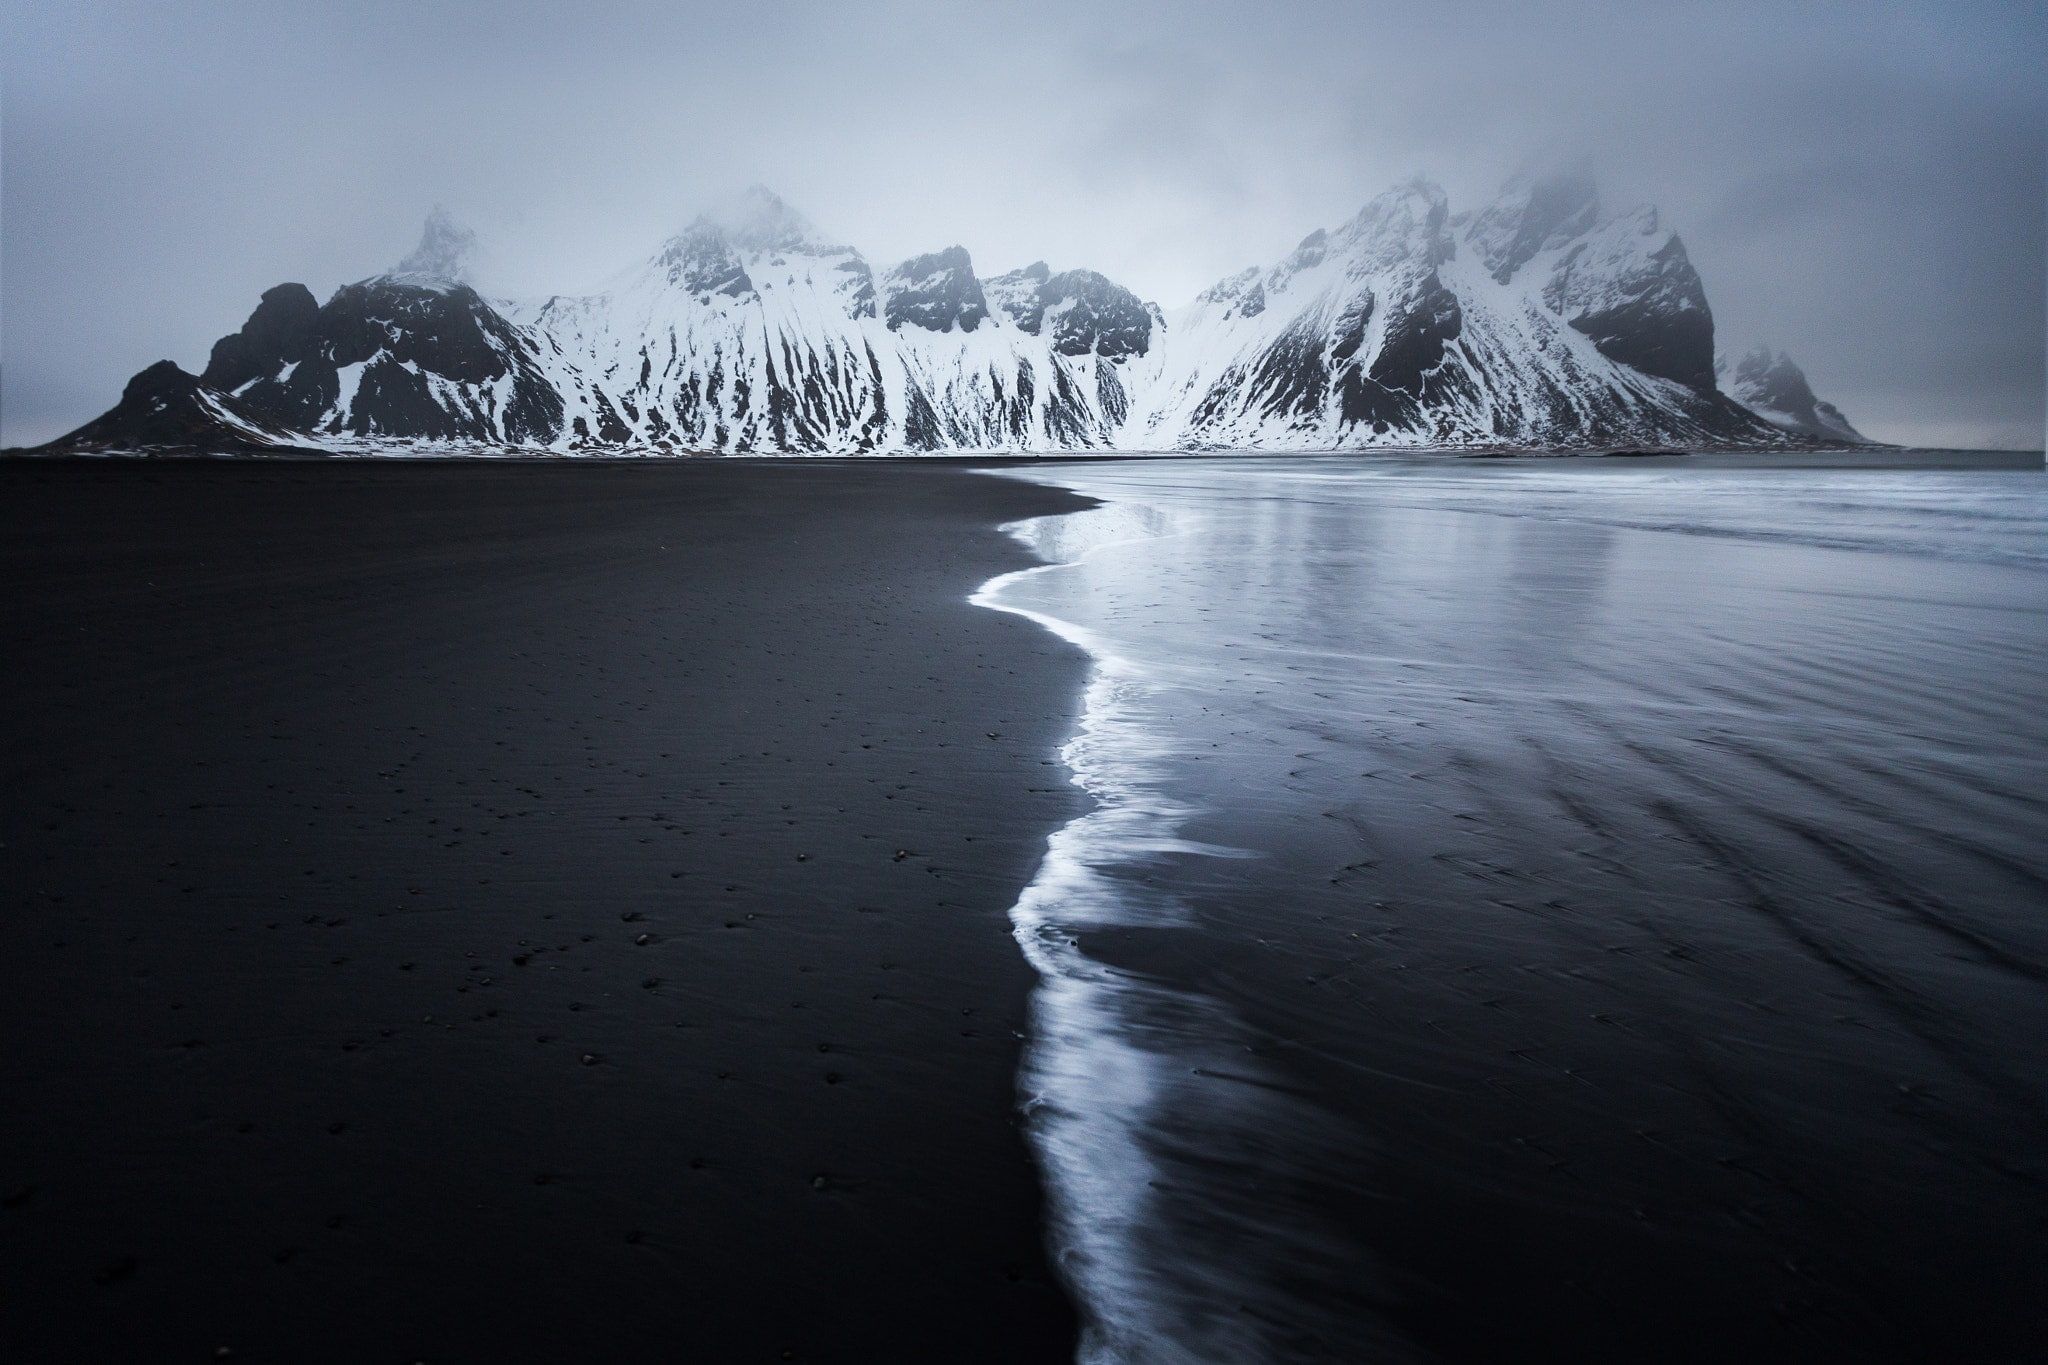 500 Black Beach Pictures HD  Download Free Images on Unsplash